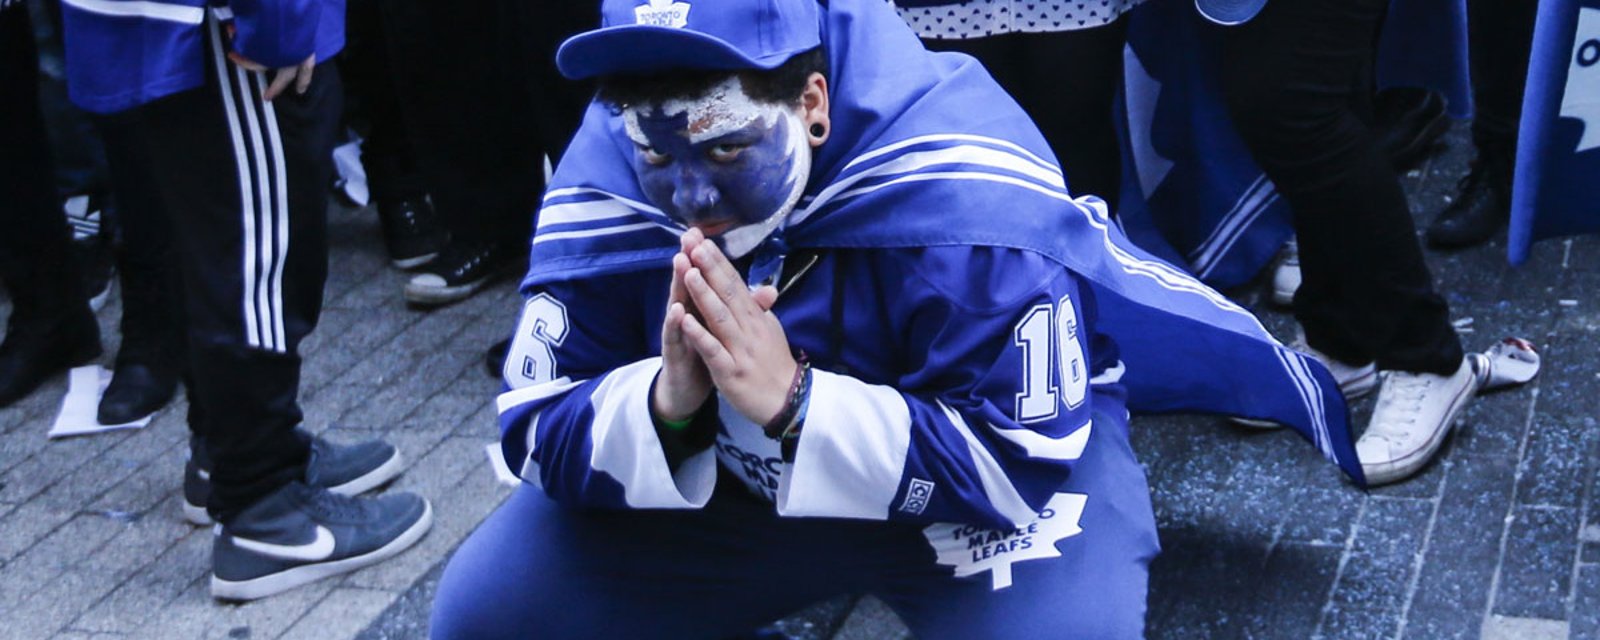 Report: Major inconvenience prior to Leafs' home opener!